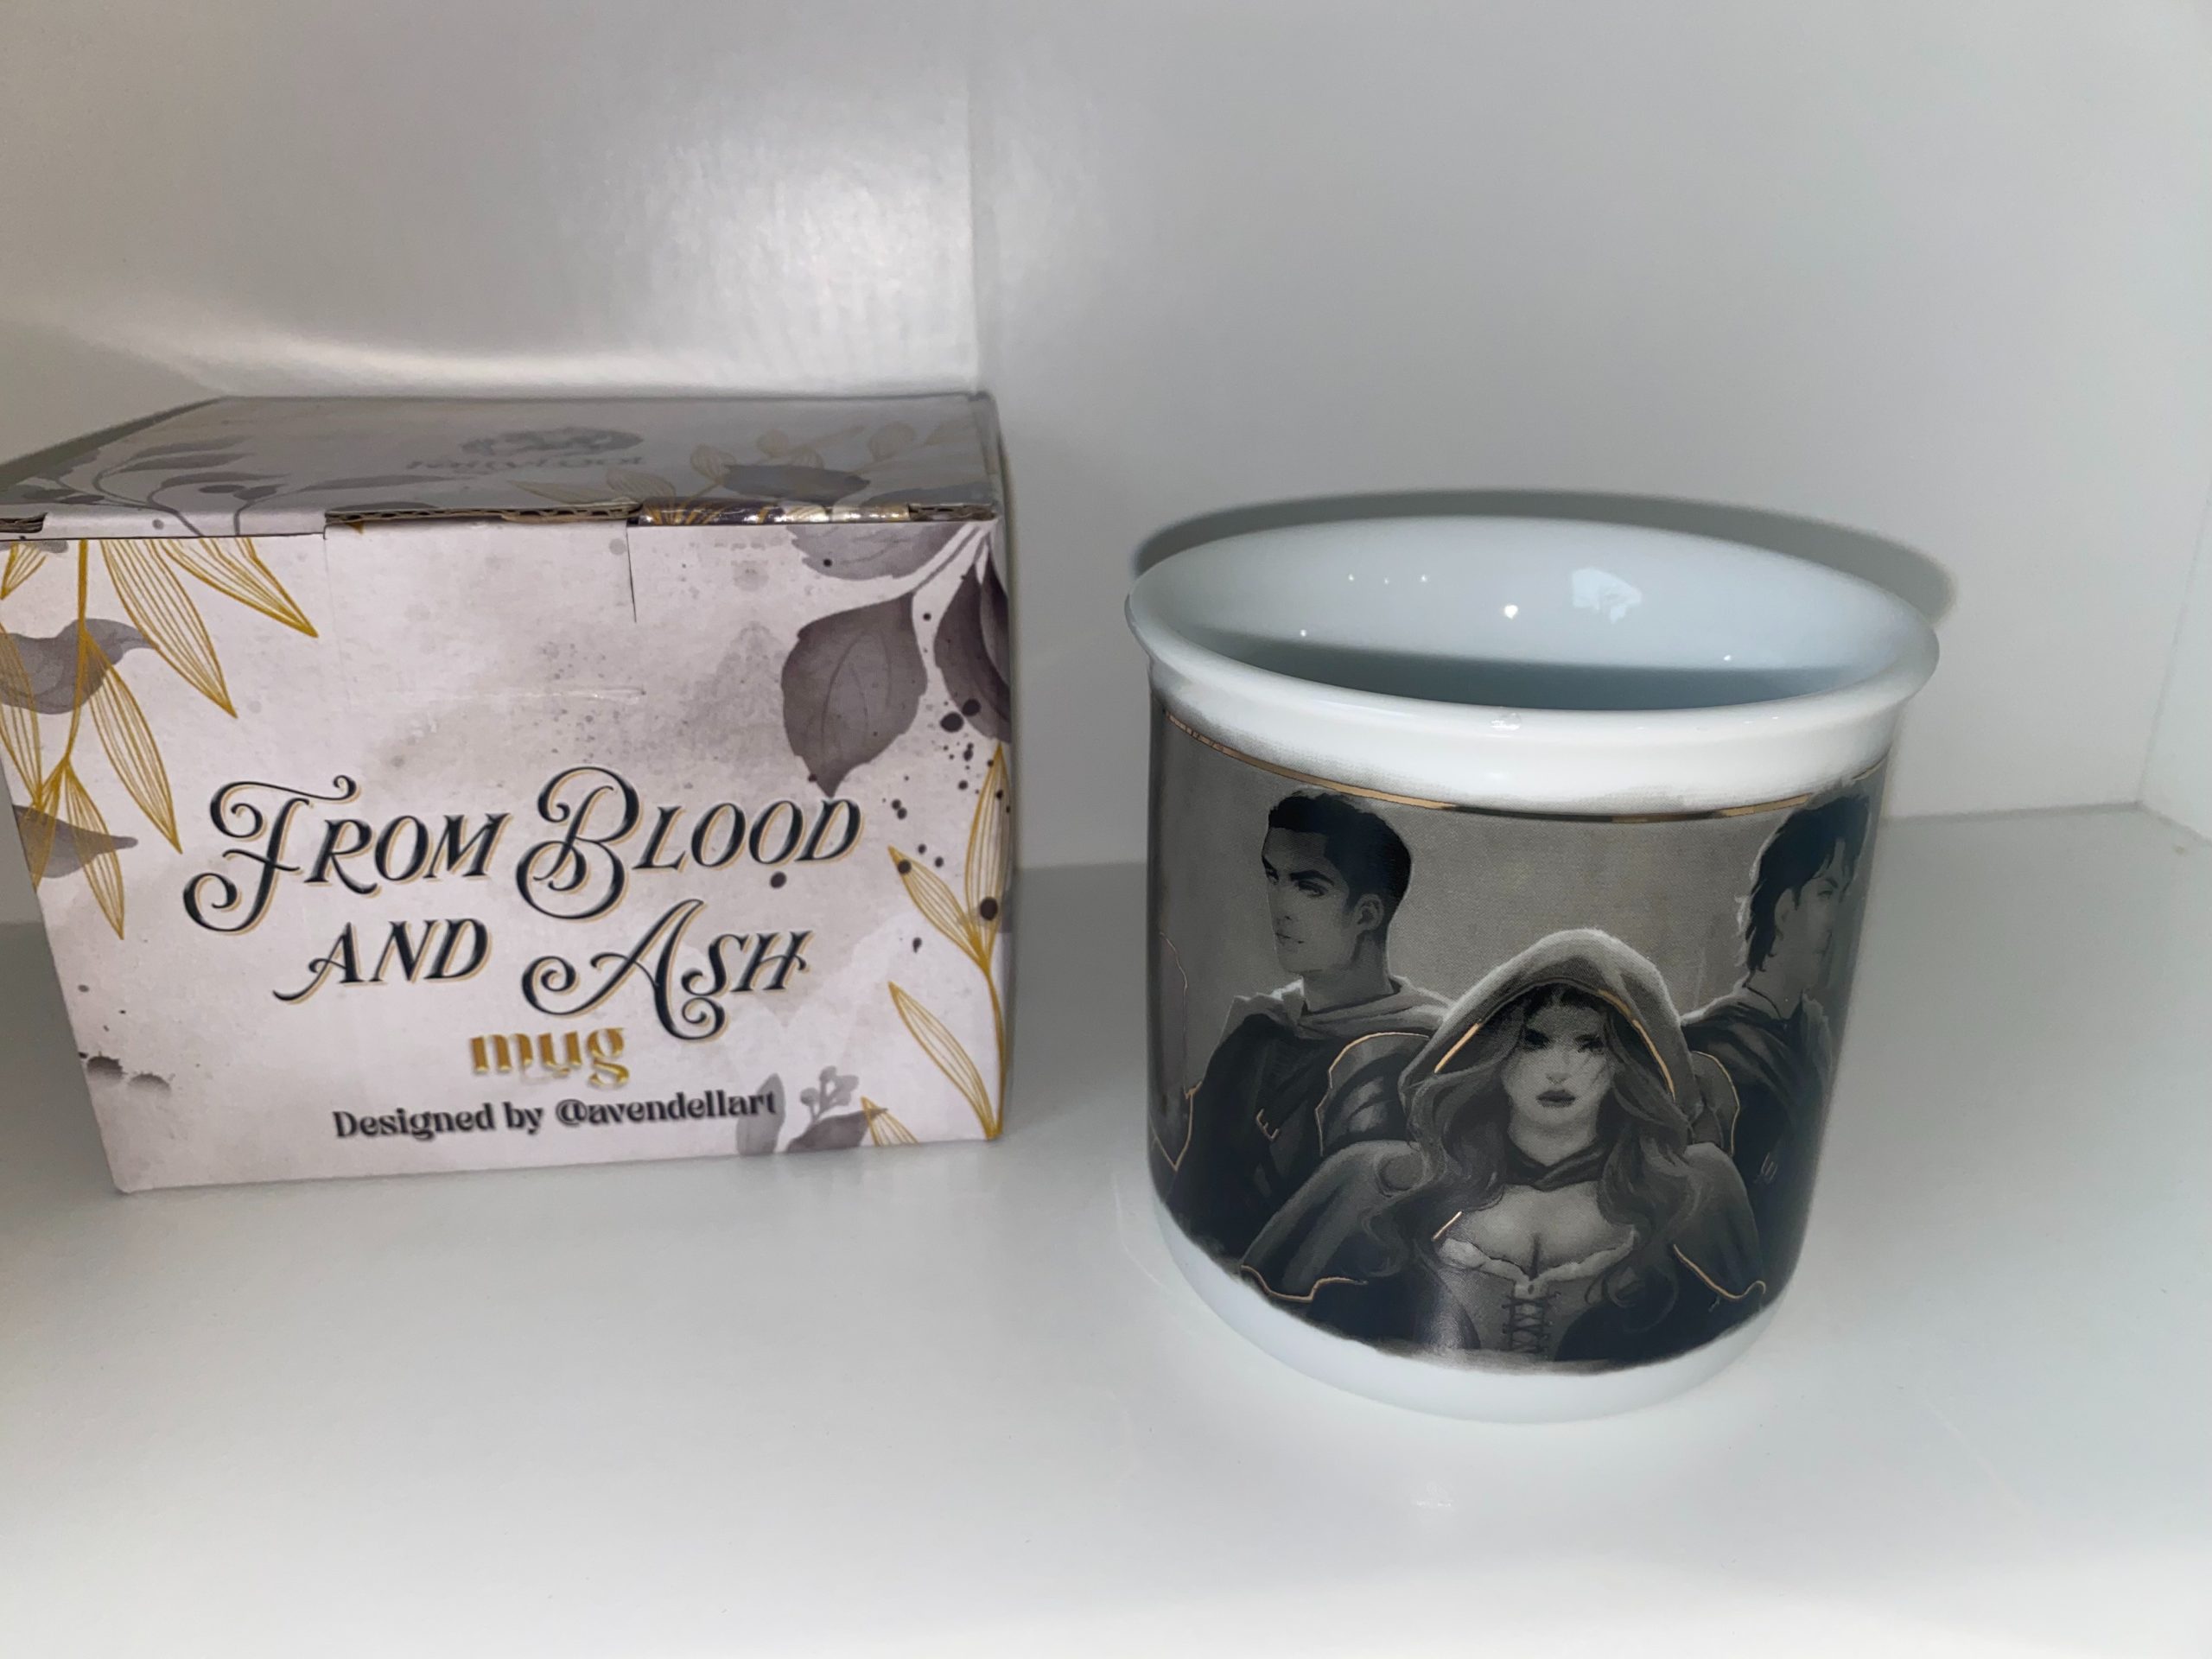 Fairyloot Foiled Mug From Blood And Ash Jennifer L. Armentrout